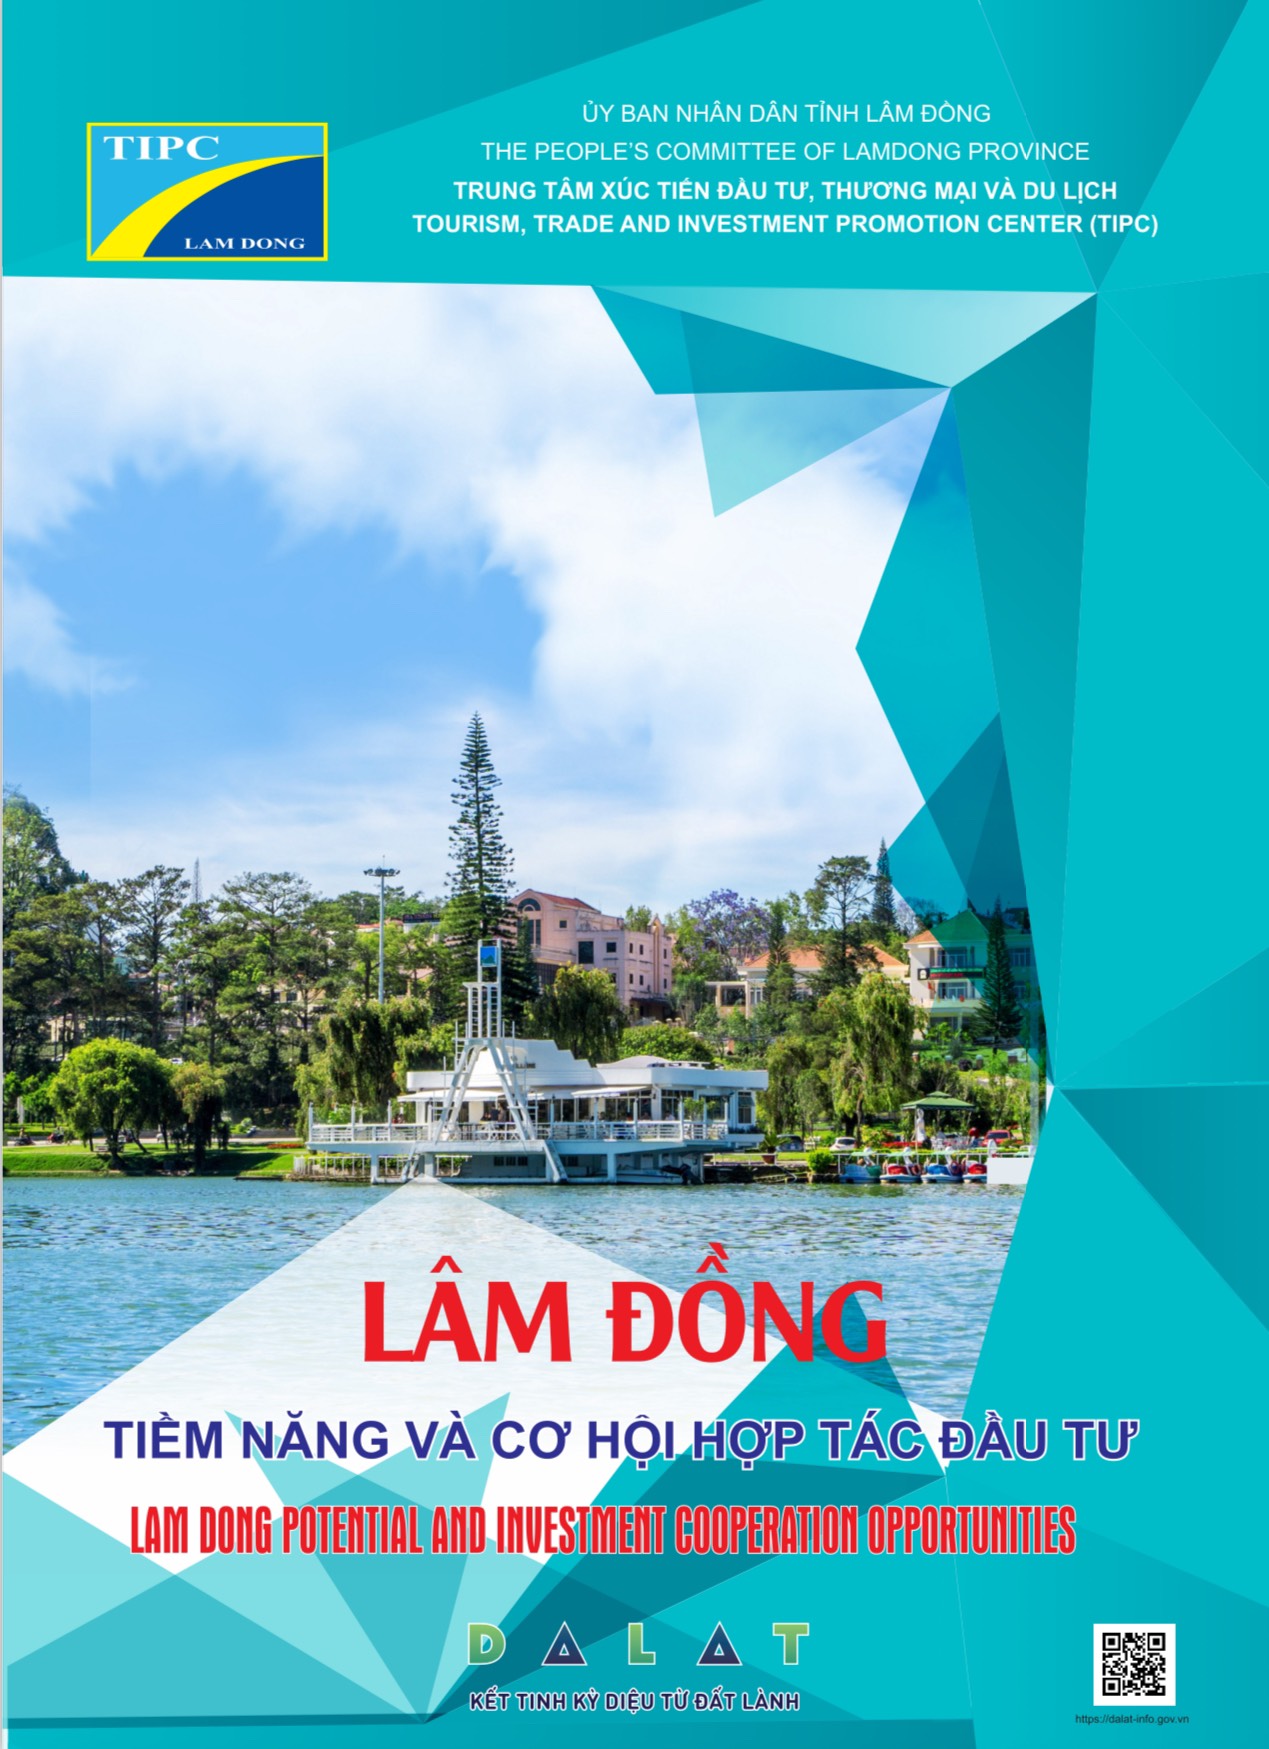 LAM DONG POTENTIAL AND INVESTMENT COOPERATION OPPORTUNITIES